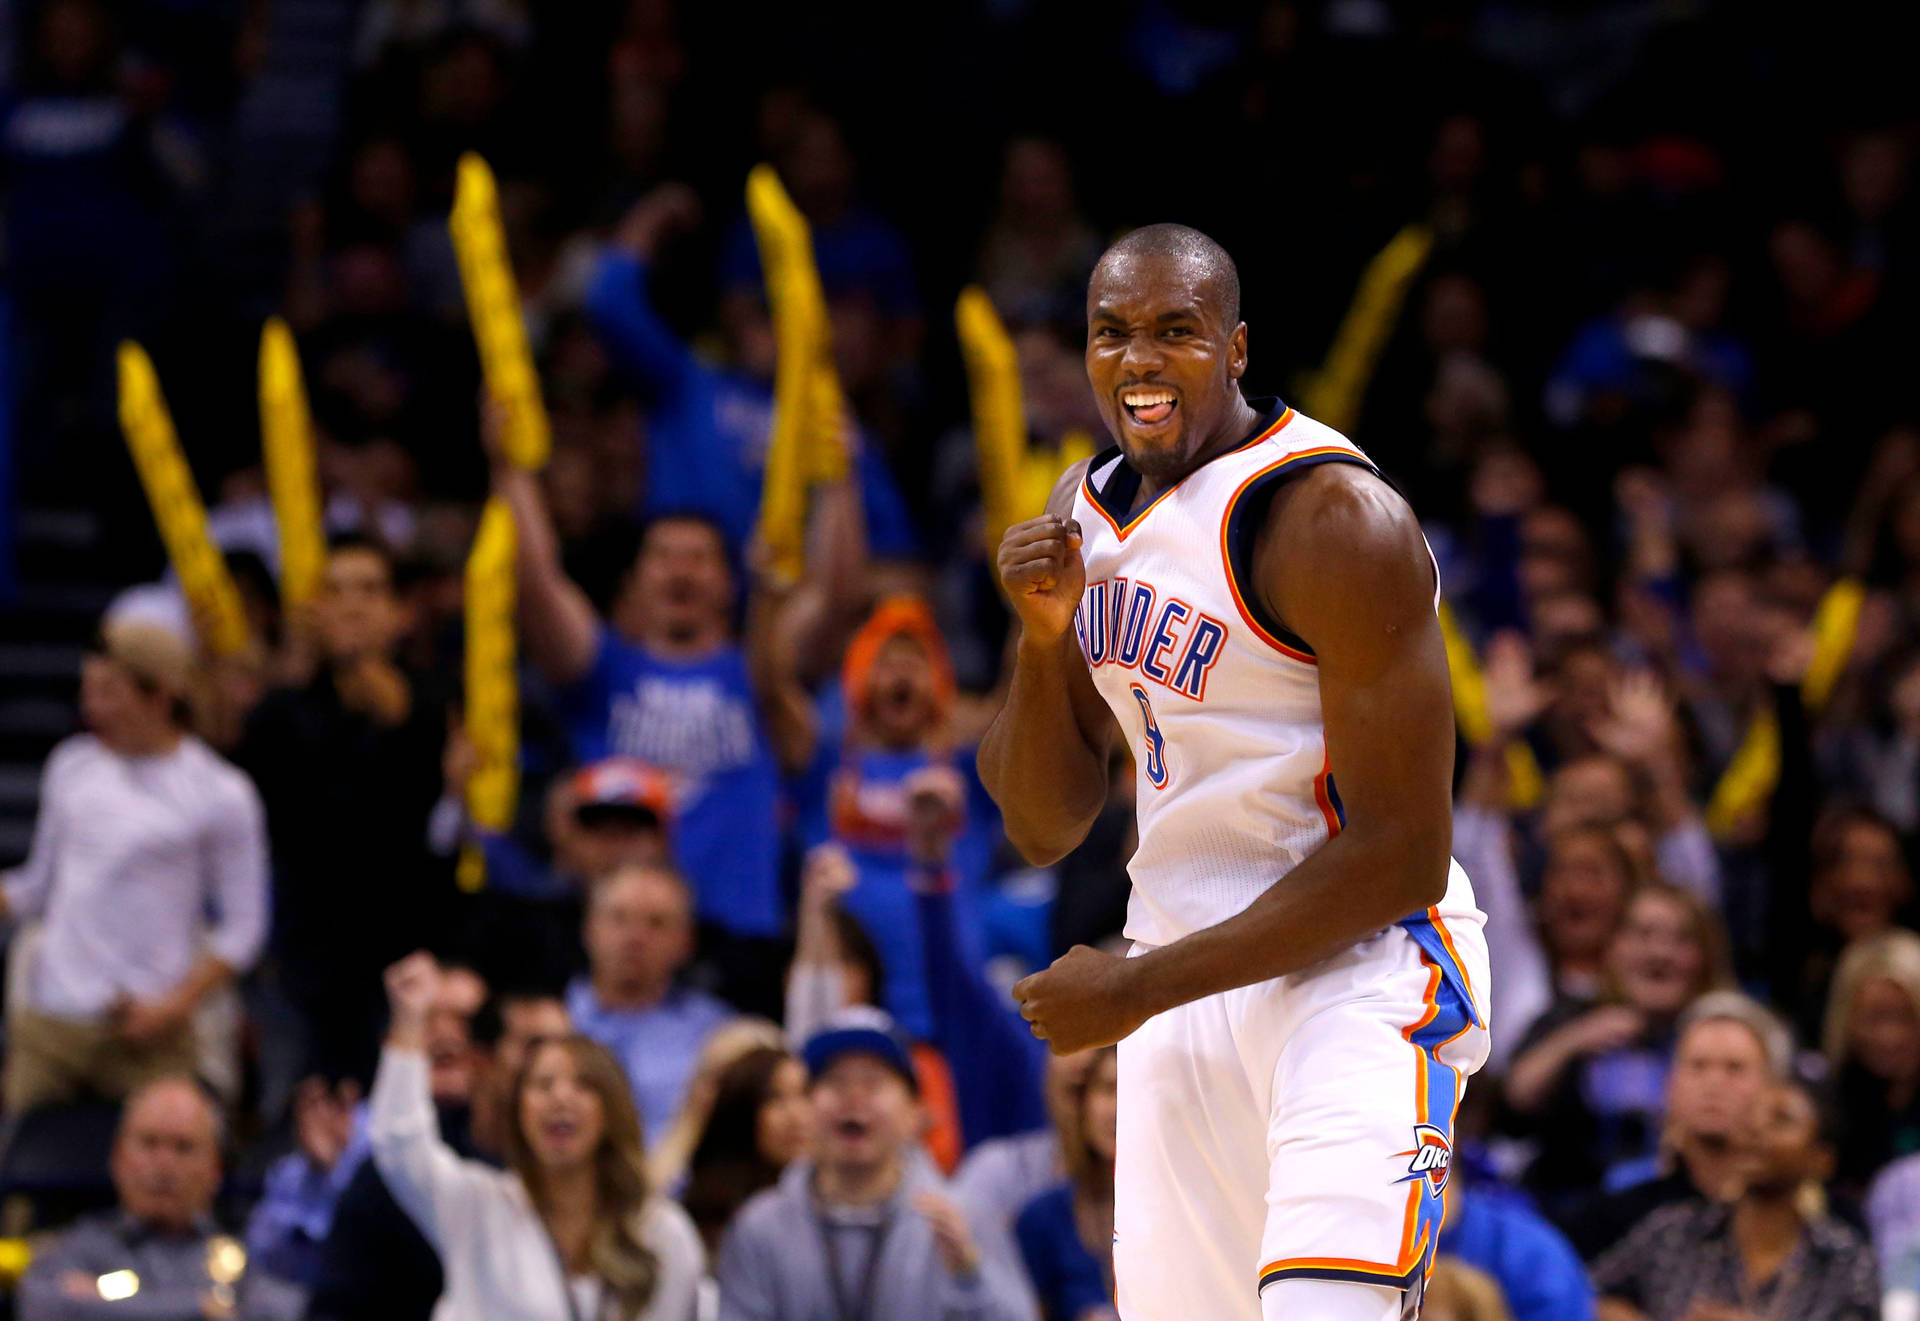 Serge Ibaka With Cheering Fans